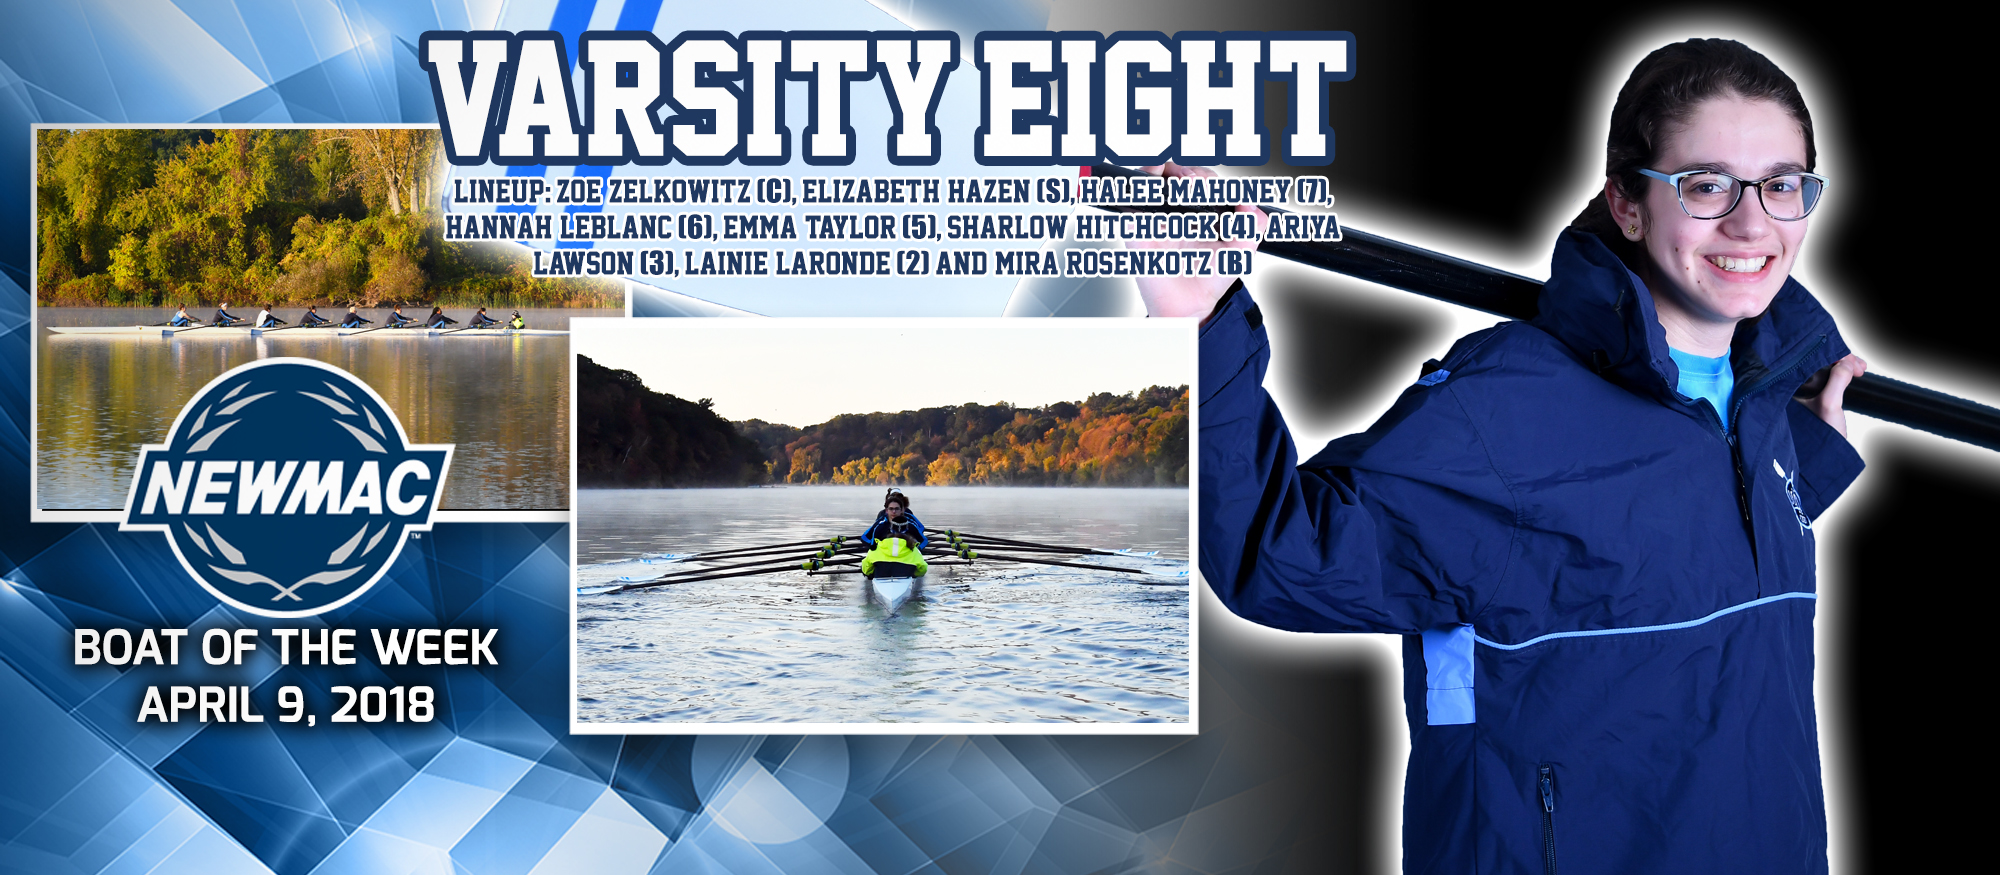 Graphic promoting the Lyons Rowing Boat of the Week, which garnered the honors after tough competition last weekend. Pictured are two action photos as well as a posed photo of rower Halee Mahoney.